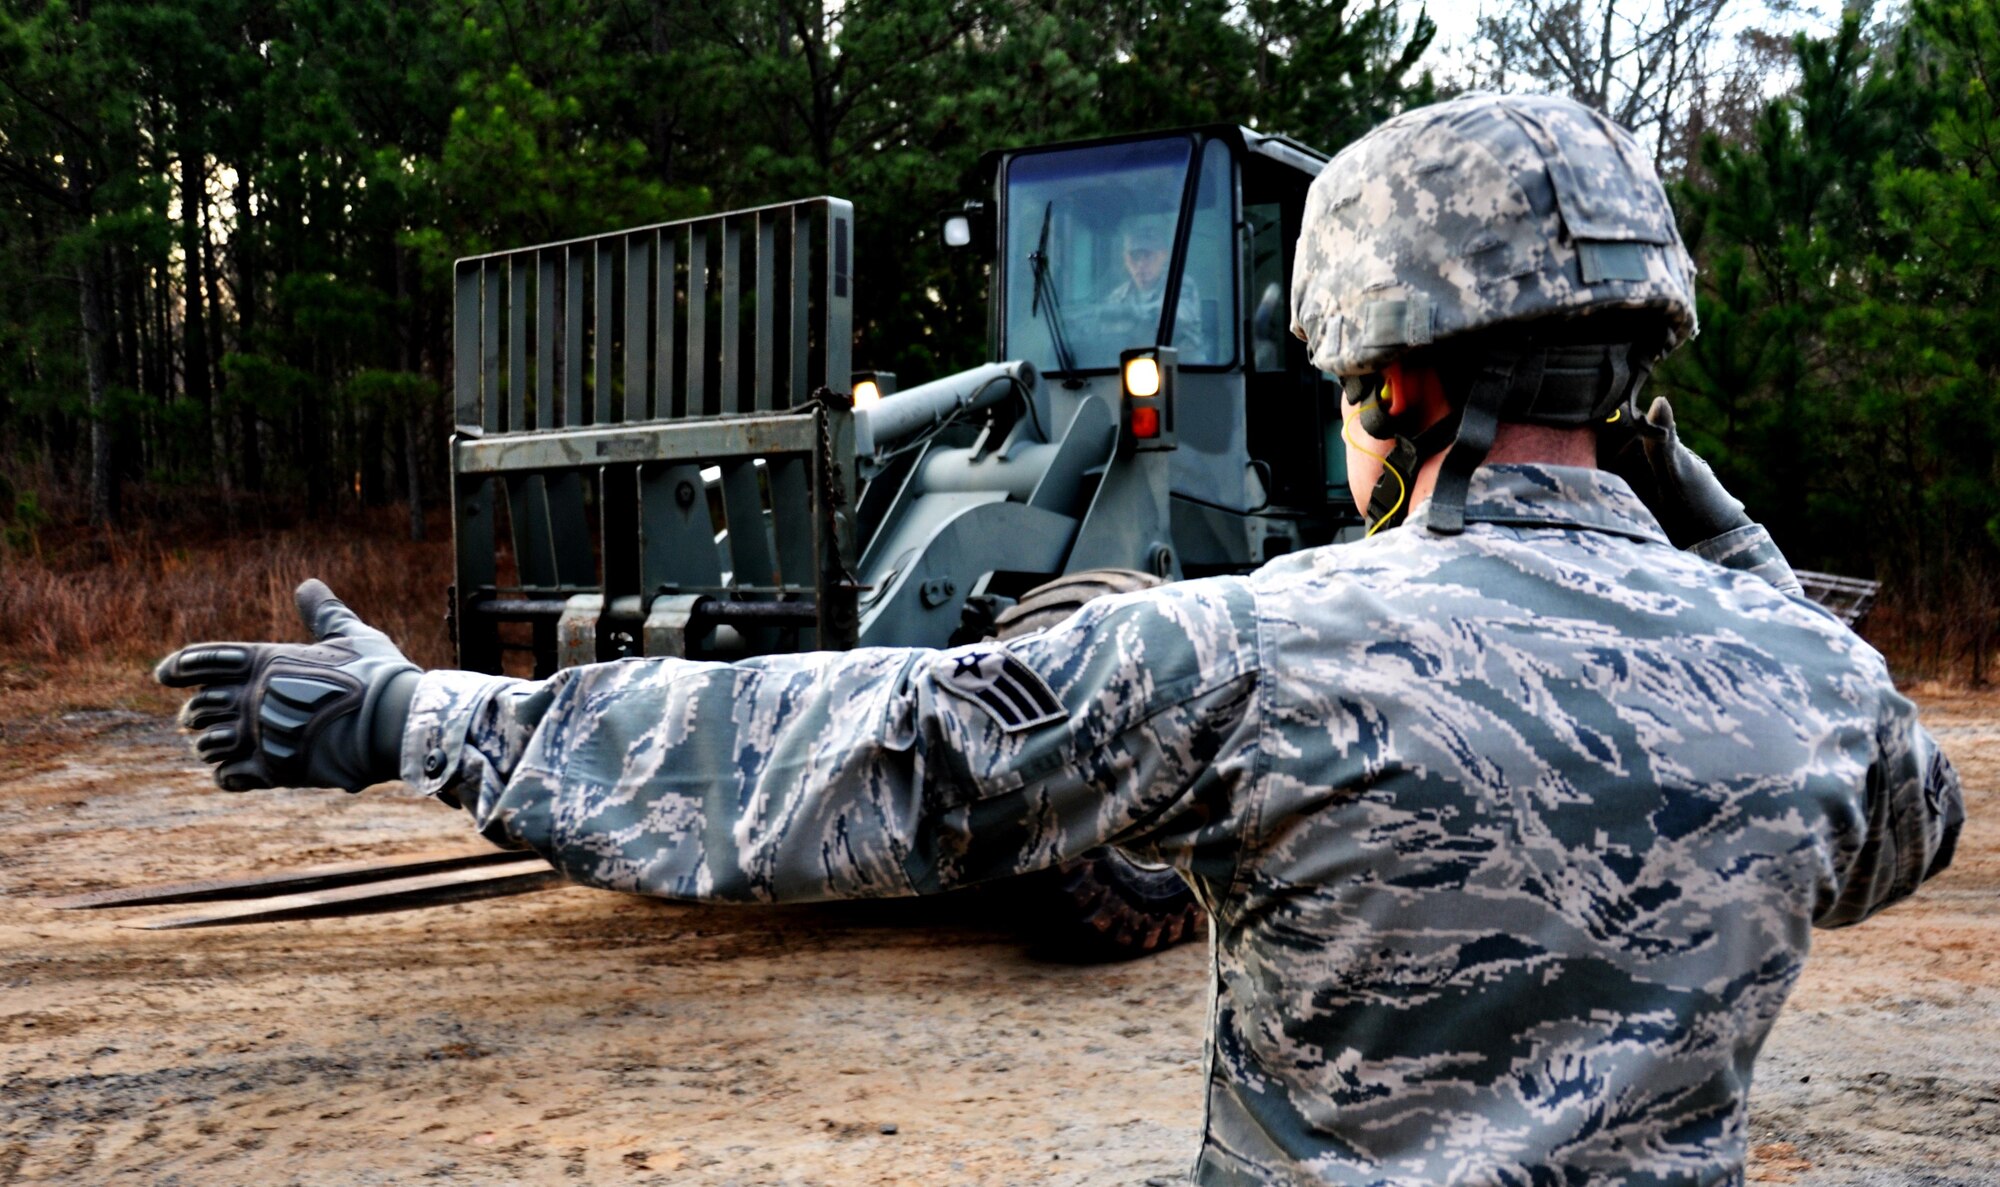 Senior Airmen Tyler Wright, 911th Force Support Squadron, Pittsburgh, Pa., guides a forklift during the Readiness Challenge for Force Support Silver Flag at Dobbins Air Reserve Base, Georgia, March 11, 2015. About 70 Airmen on teams from Peterson Air Force Base, Colorado; the 445th FSS from Wright-Patterson Air Force Base, Ohio; the 908th FSS from Maxwell AFB, Alabama; the 910th FSS from Youngstown ARB, Ohio; the 911th FSS from Pittsburgh, Pennsylvania; and the 934th FSS from Minneapolis – St. Paul, Minnesota competed in FS Silver Flag. (U.S. Air Force photo/Senior Airman Daniel Phelps)